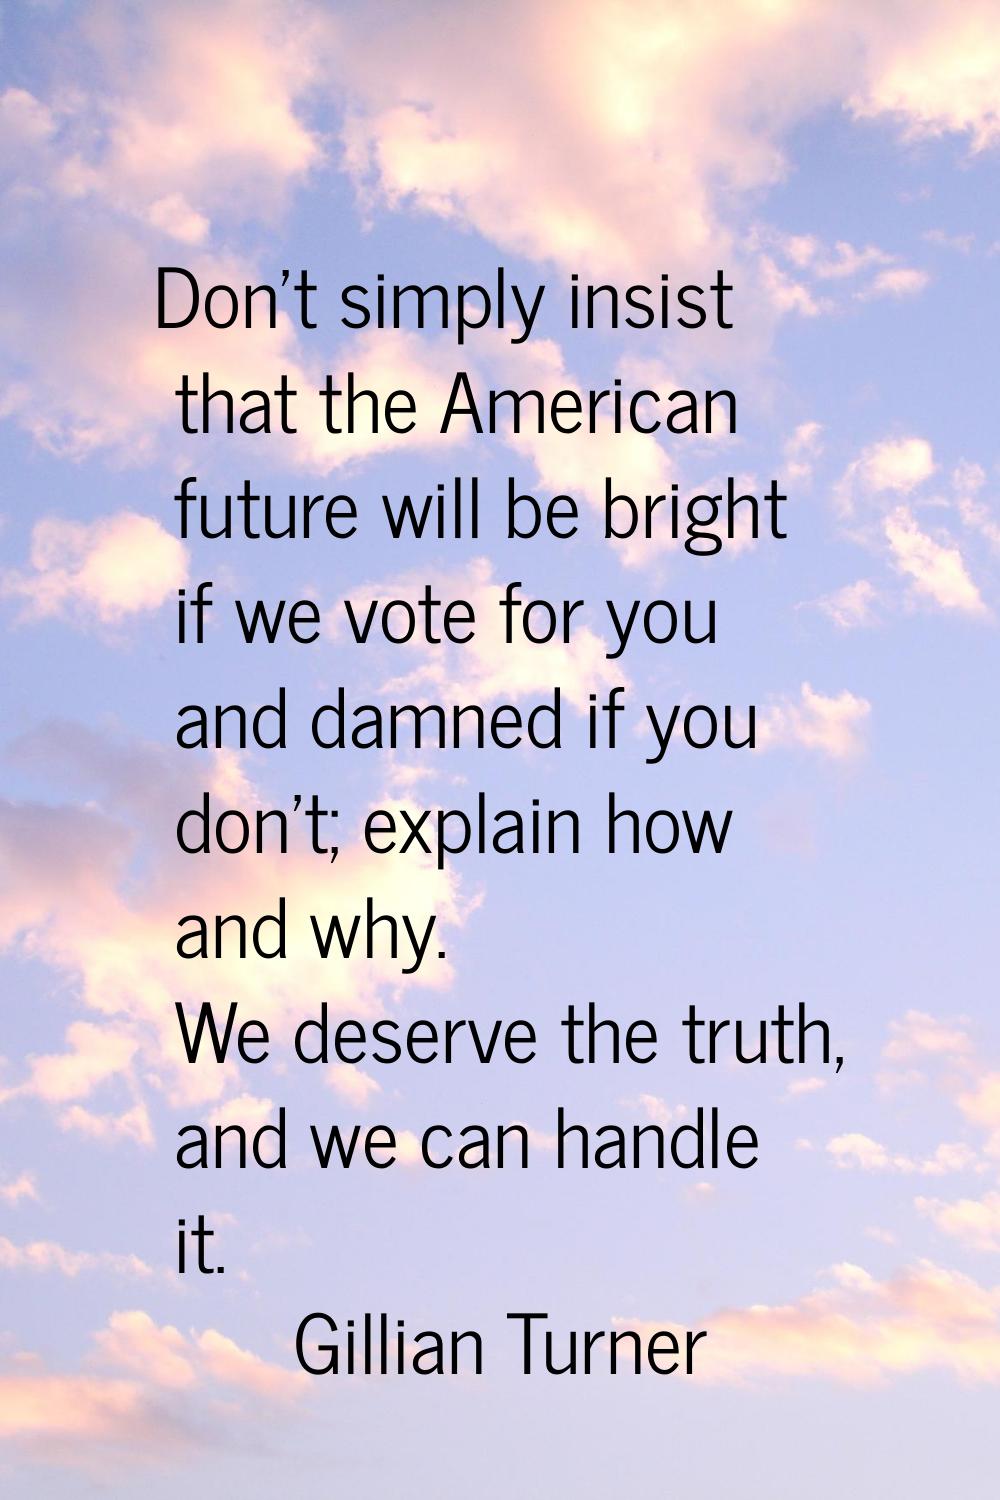 Don't simply insist that the American future will be bright if we vote for you and damned if you do